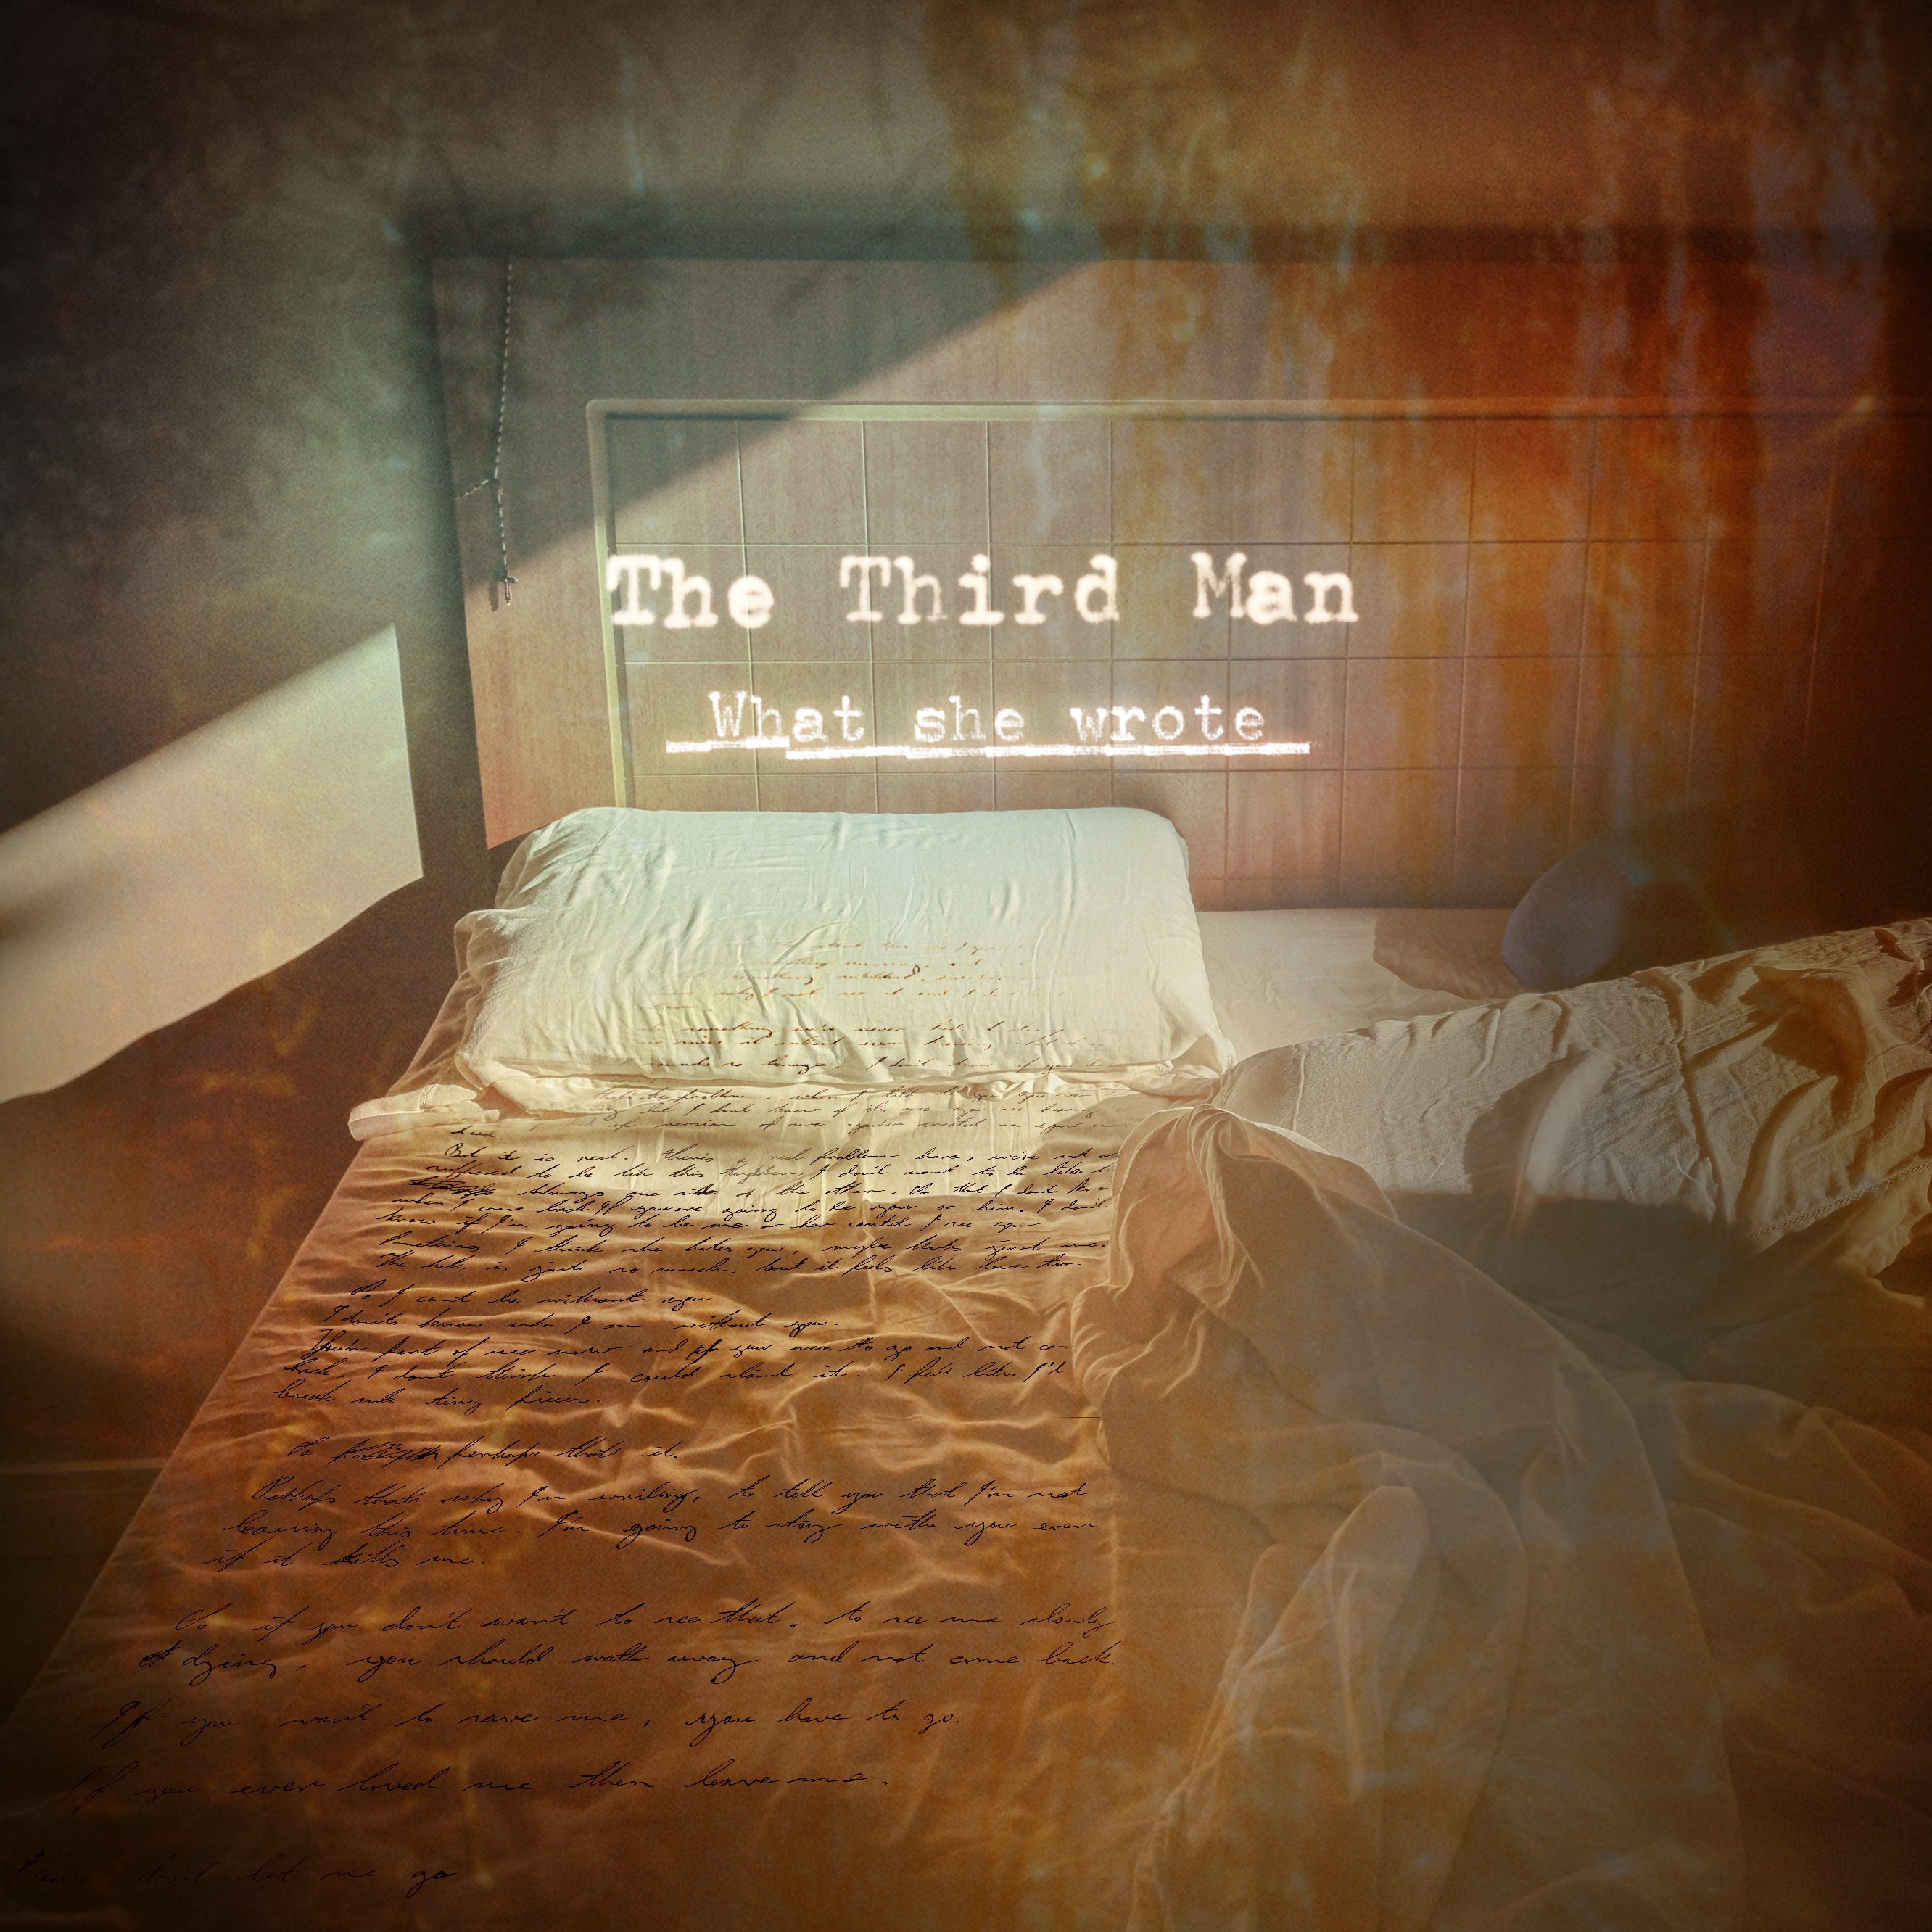 The Third Man "What She Wrote" artwork